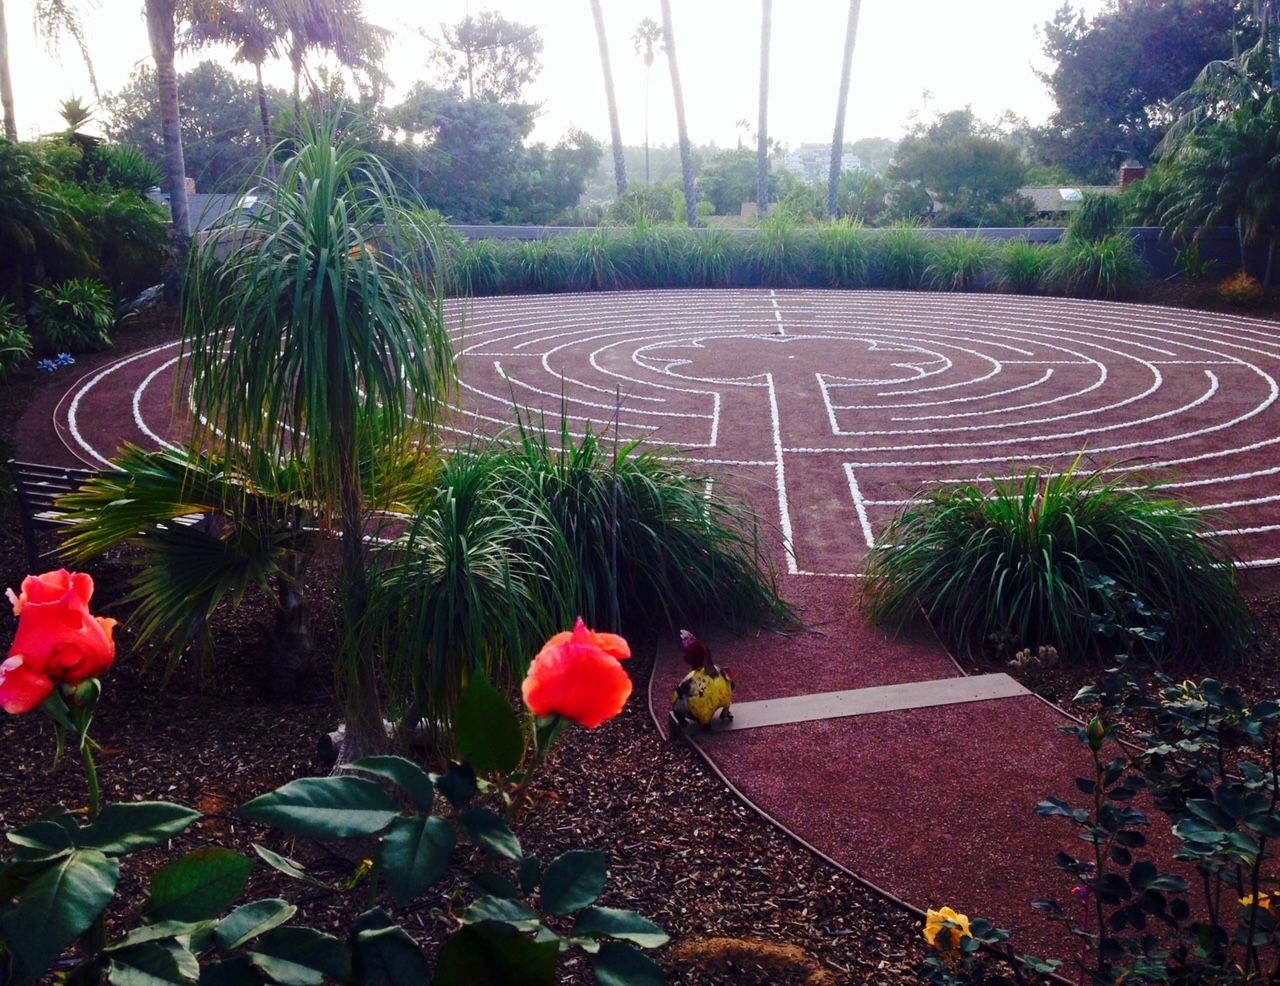 A maze in someone's backyard that replaced a green lawn -- installed to save water in drought-plagued California